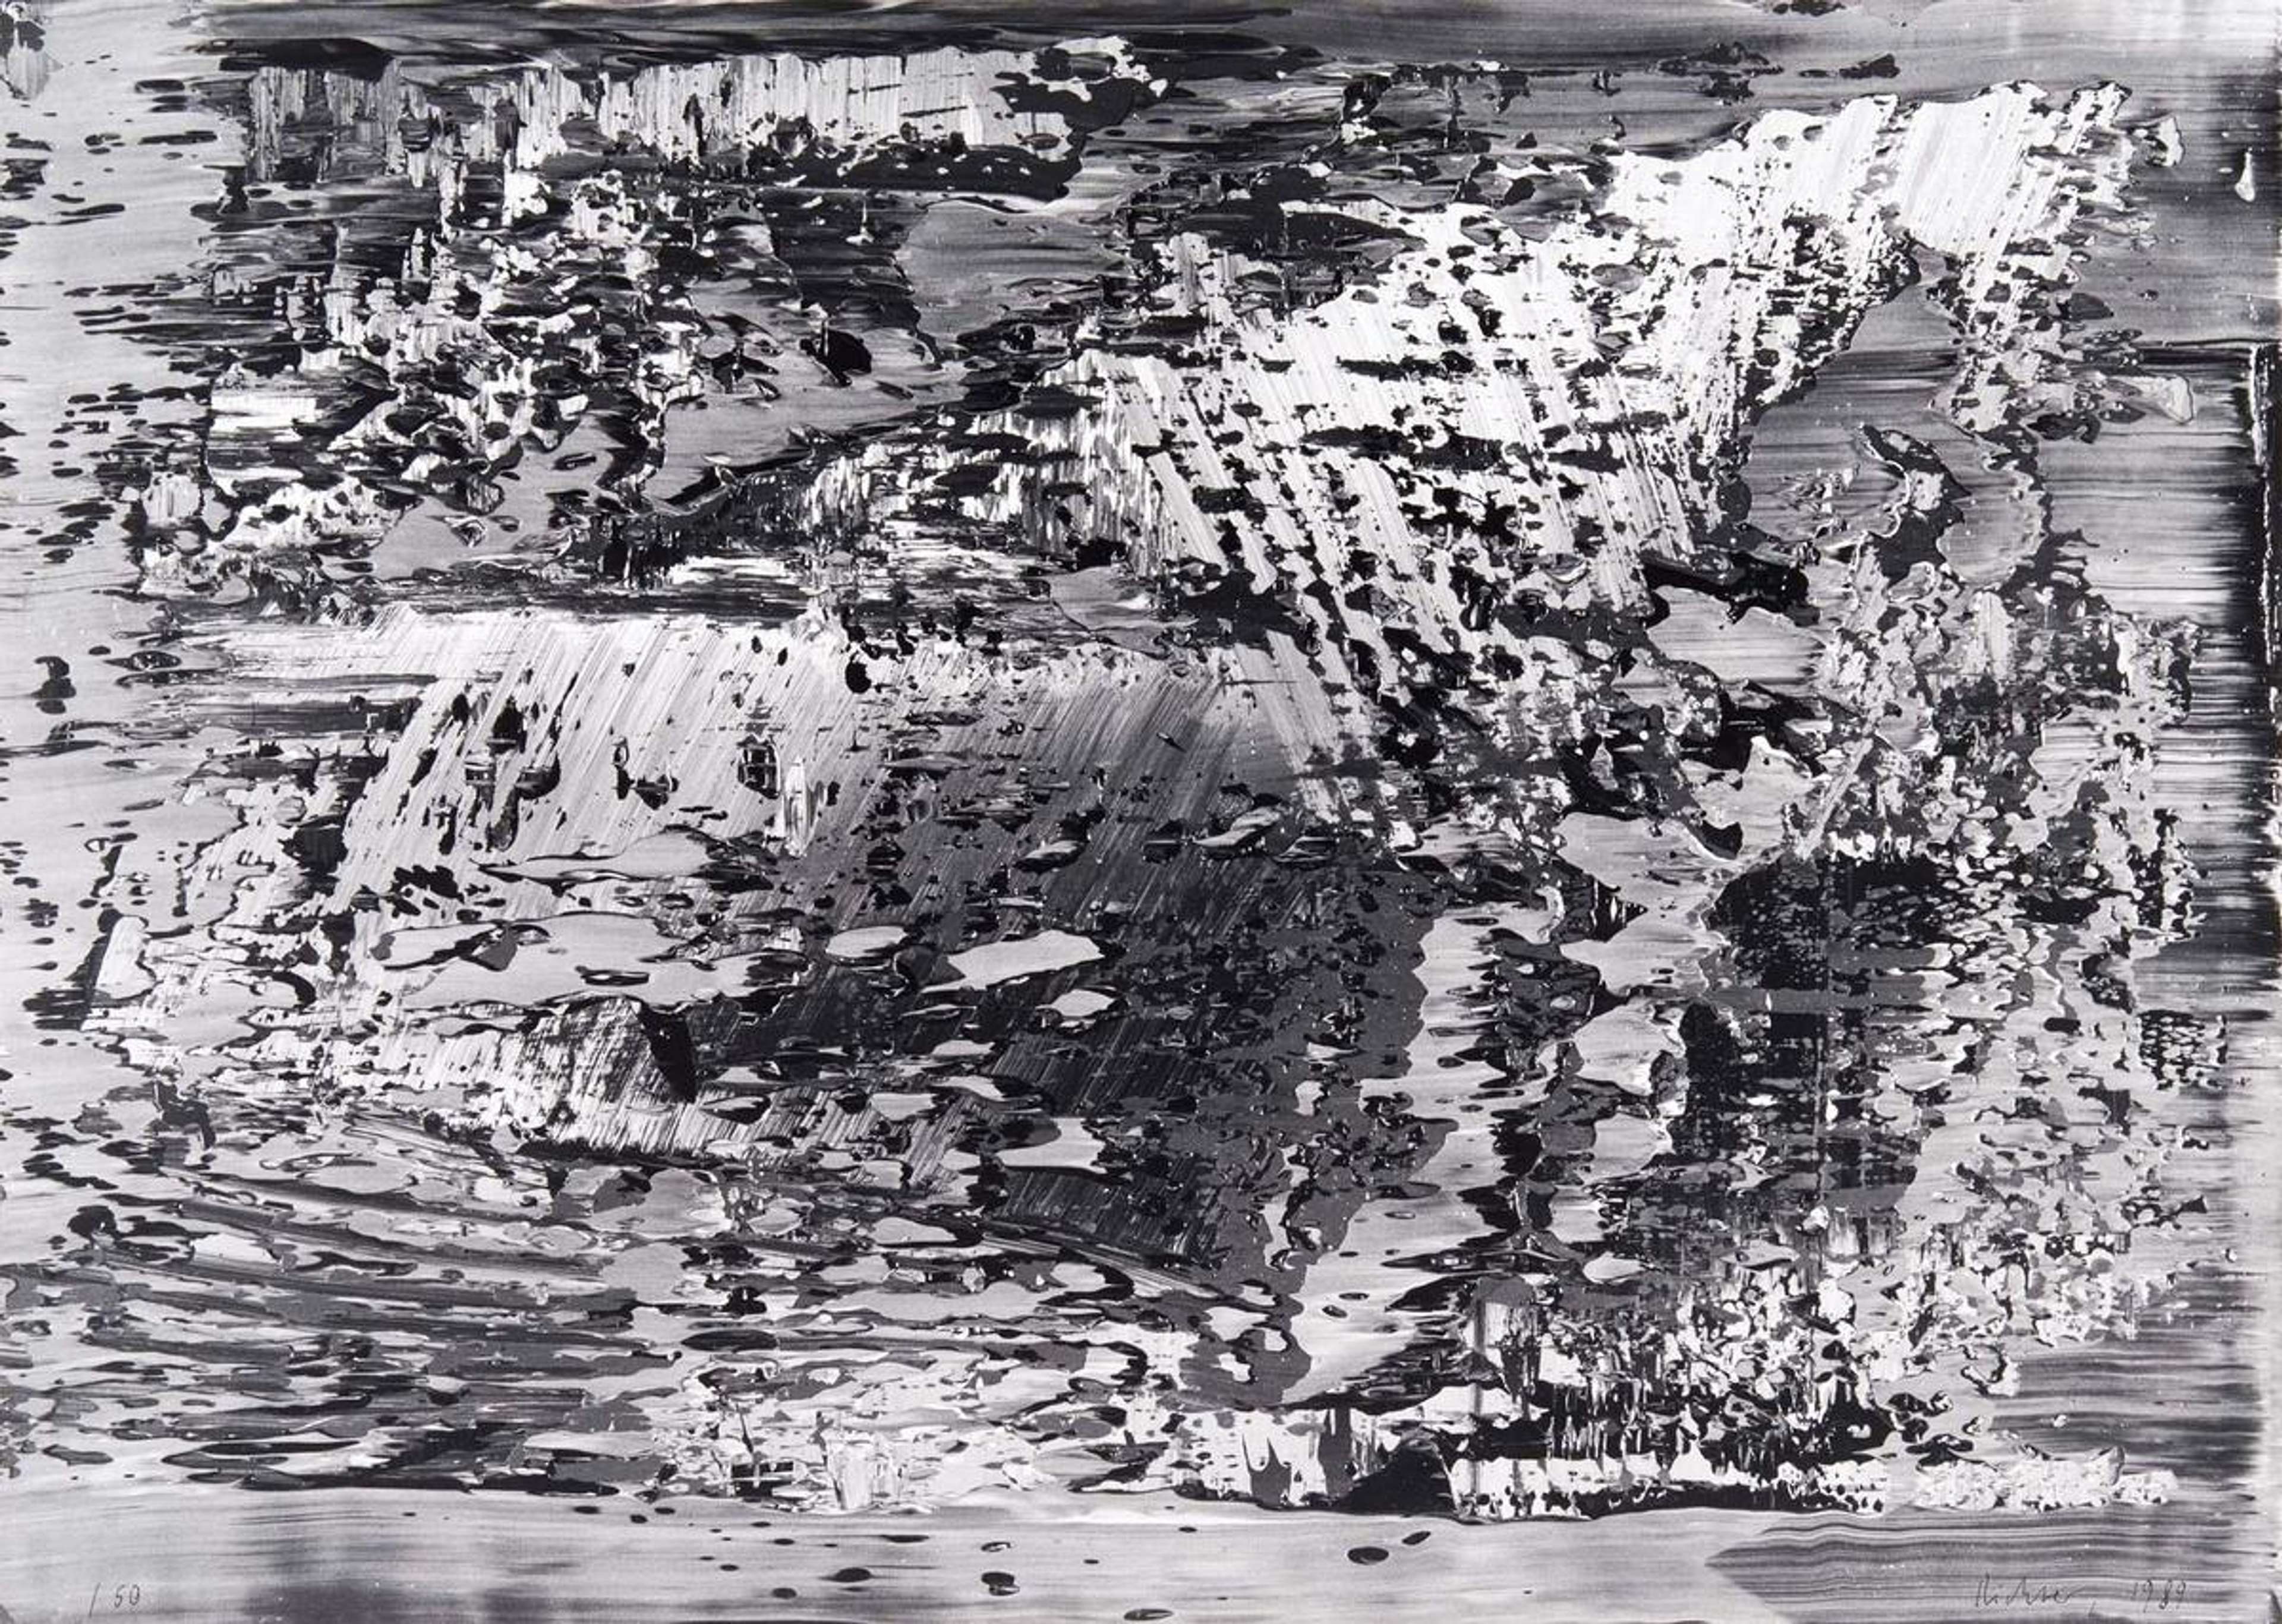 Monochrome print by Gerhard Richter depicting abstracted curved shapes, resembling oil paint smeared across a flat photo surface.